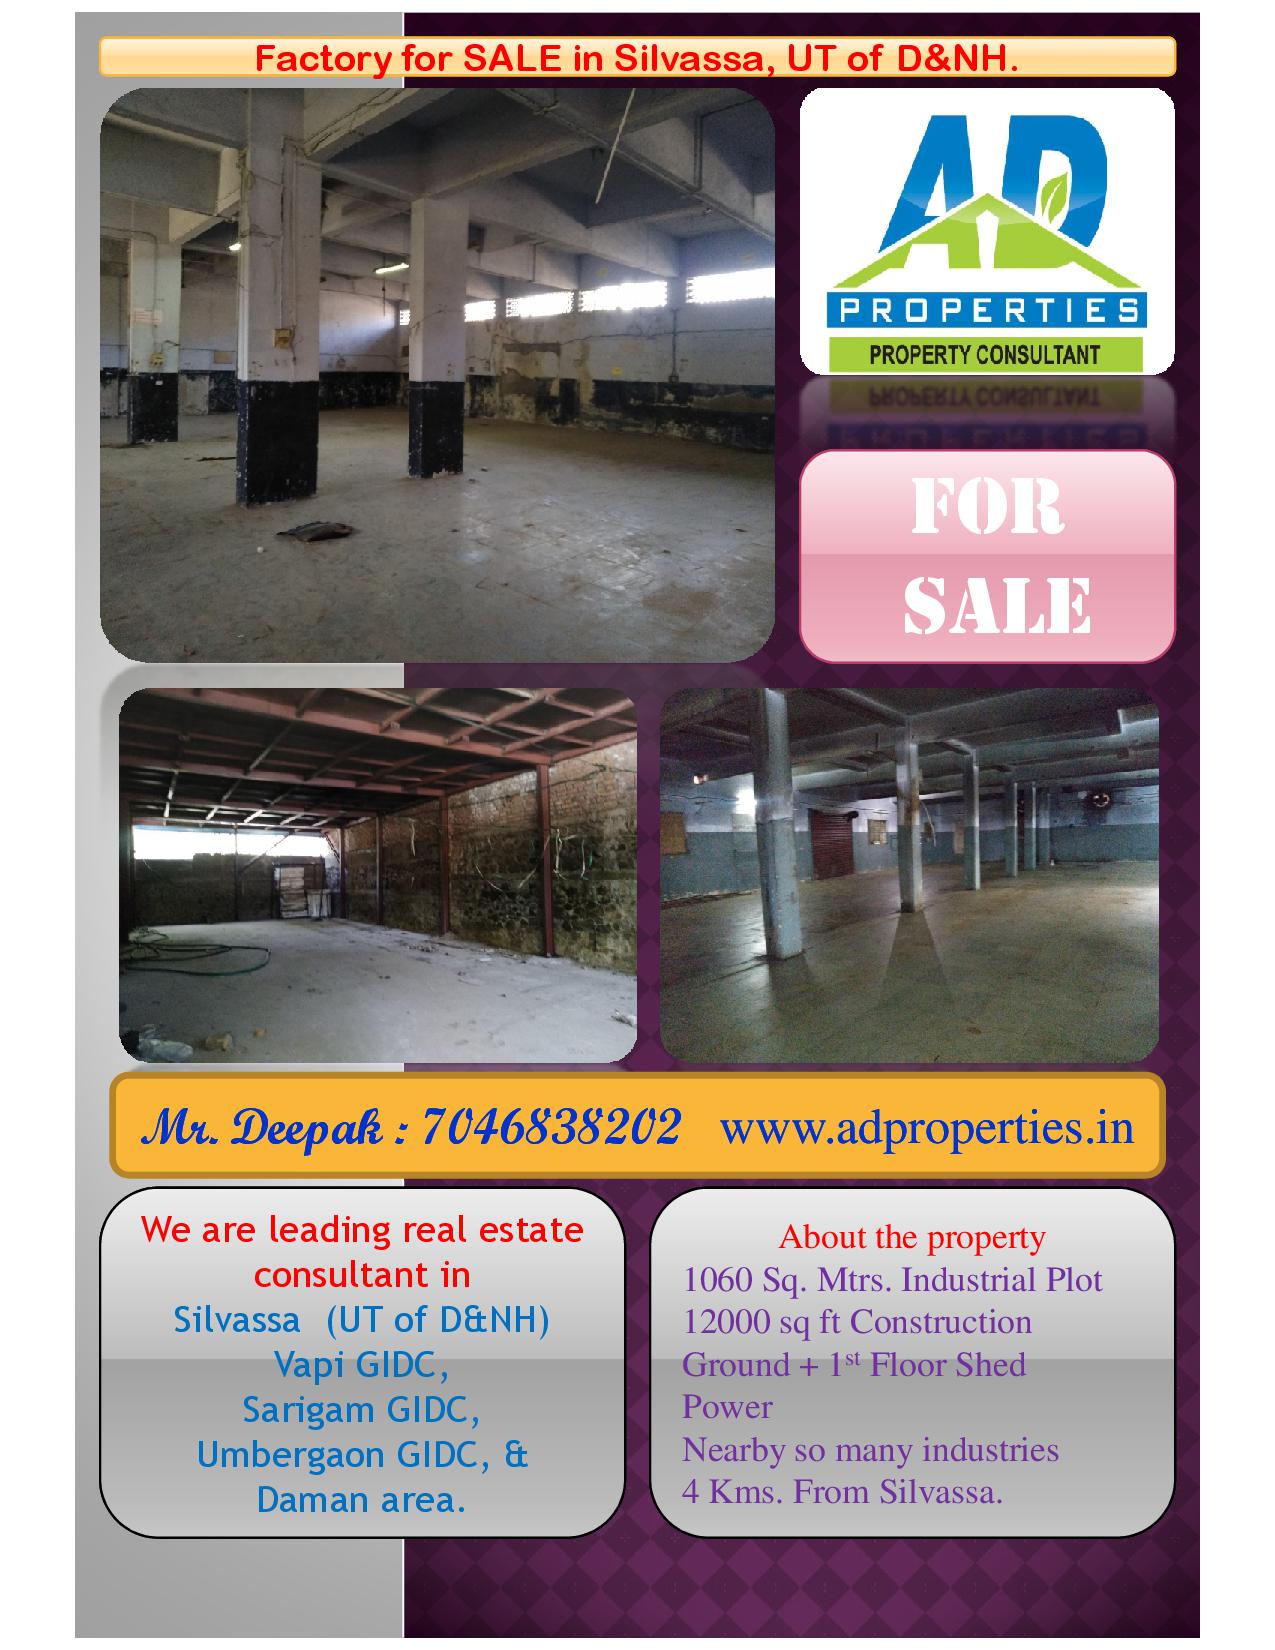 Factory for SALE at Silvassa